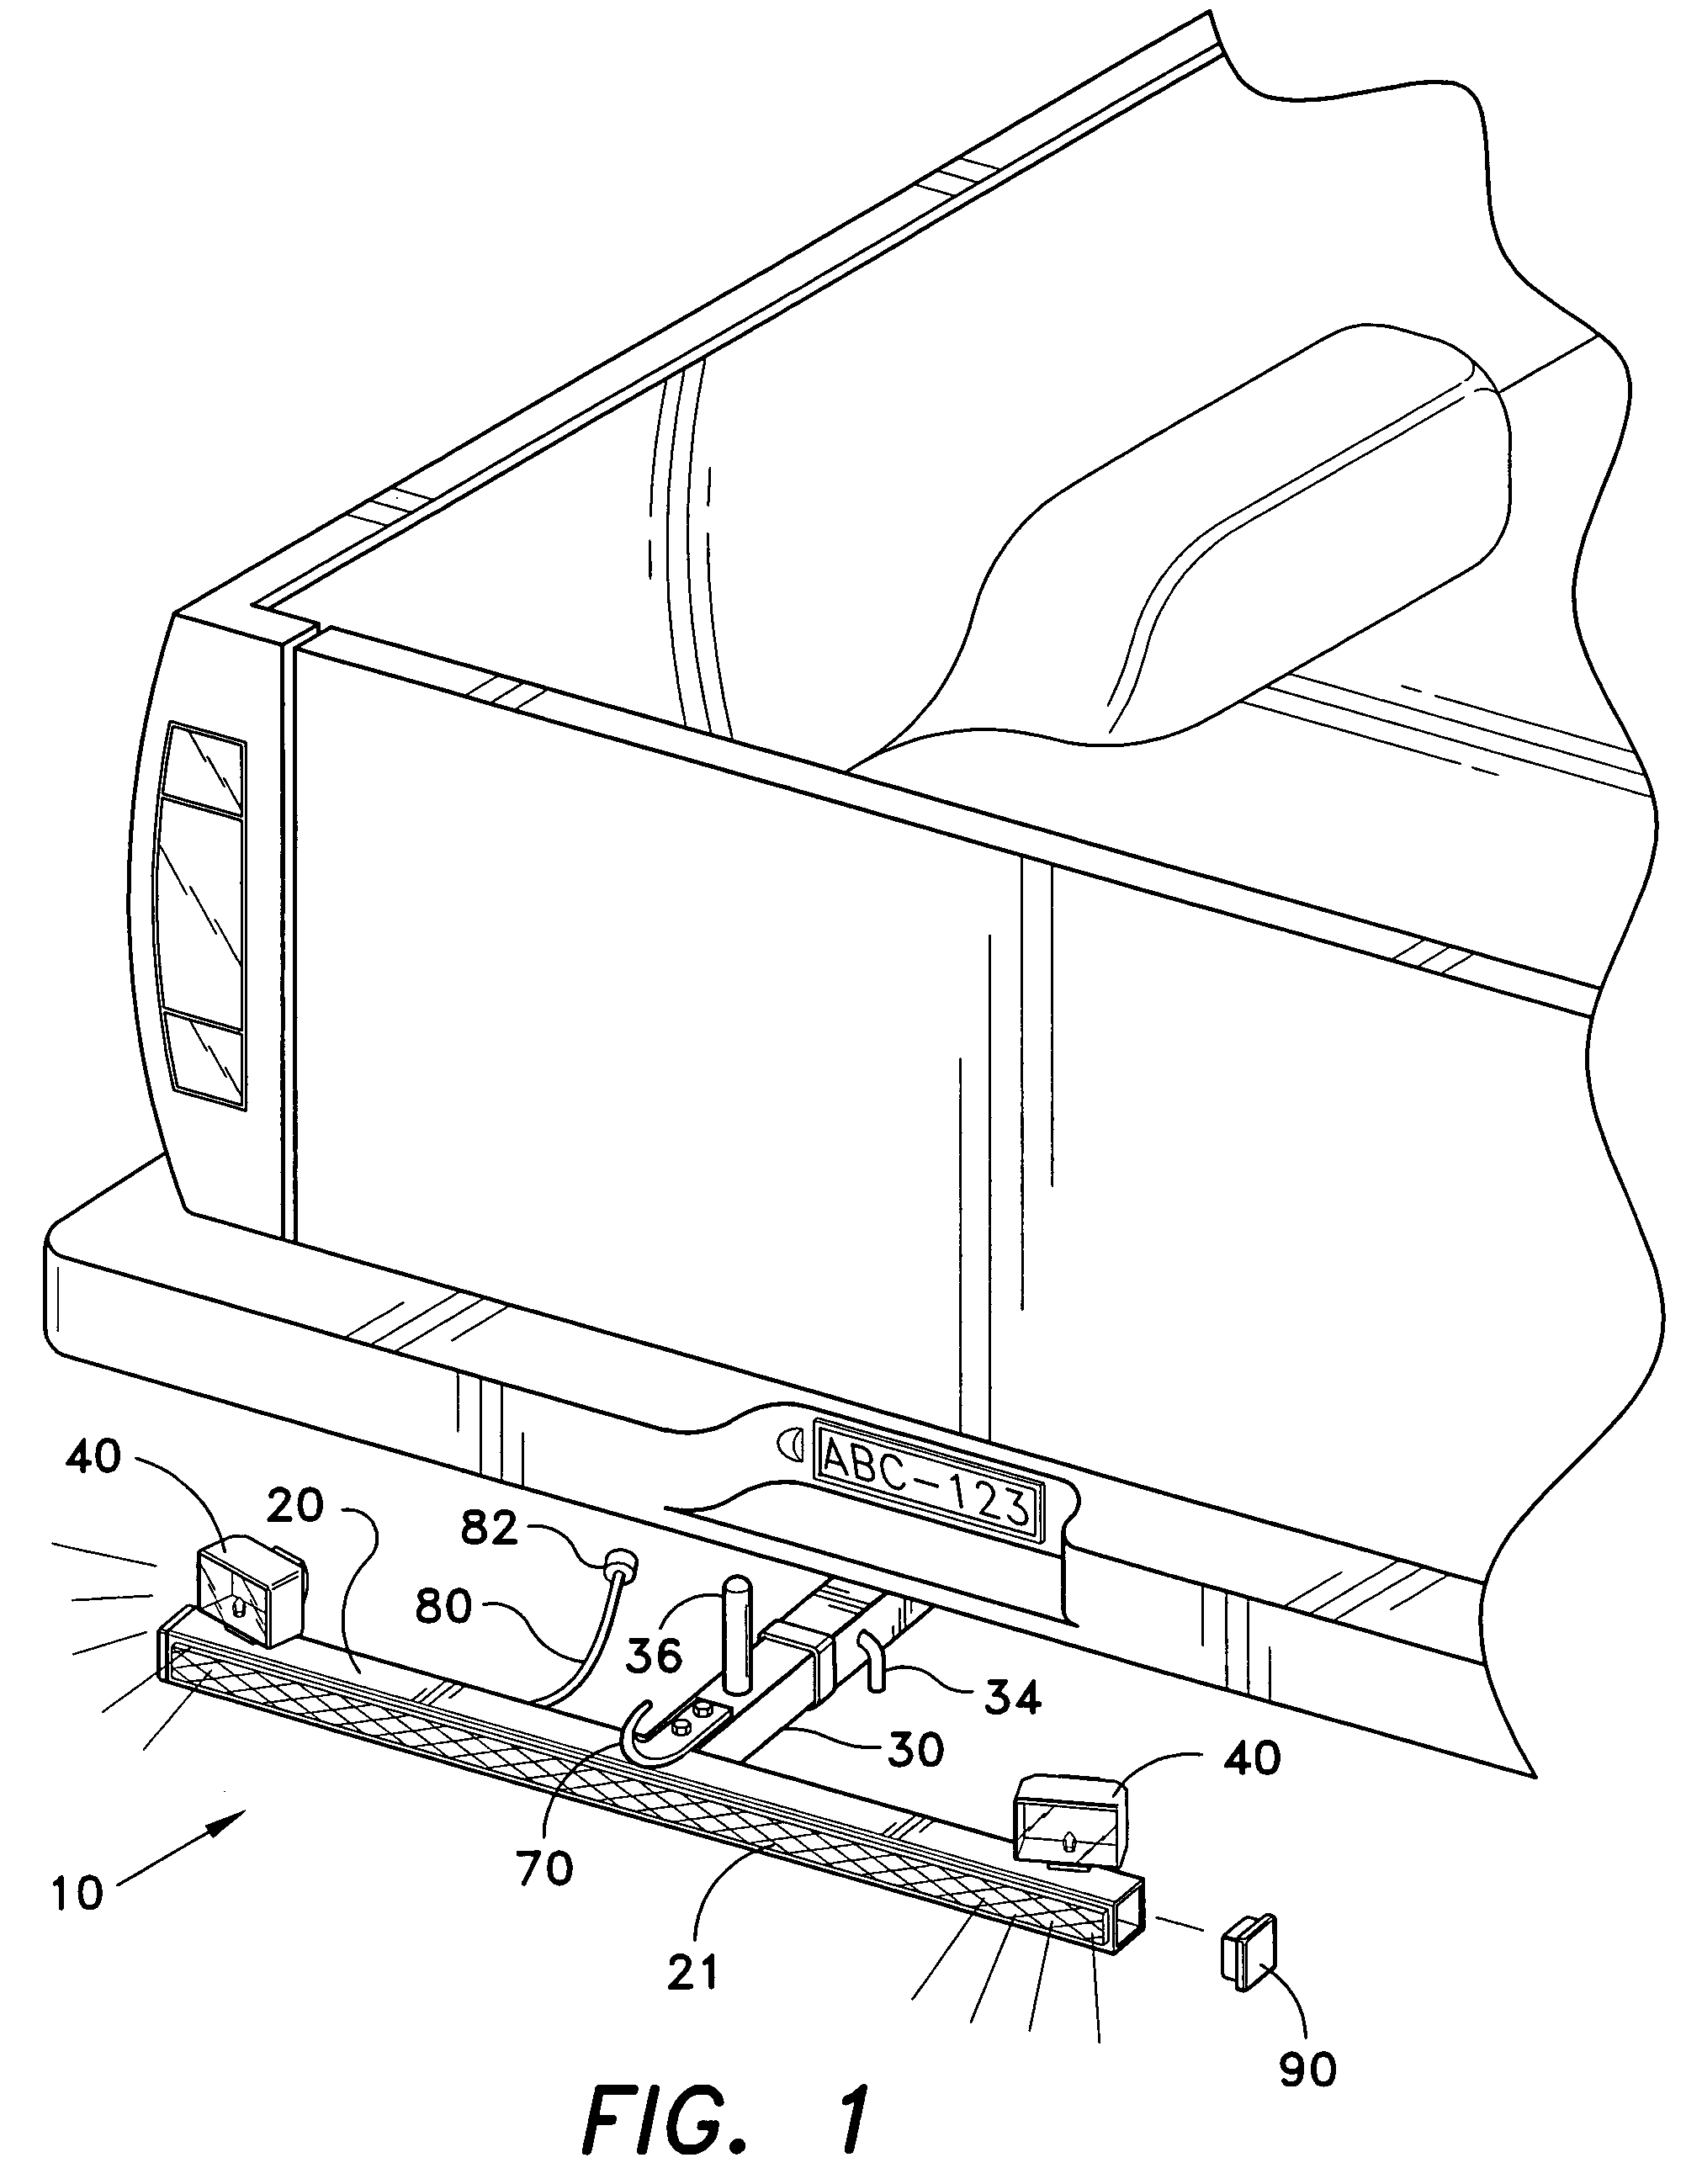 Lighting and safety unit for trailer hitch